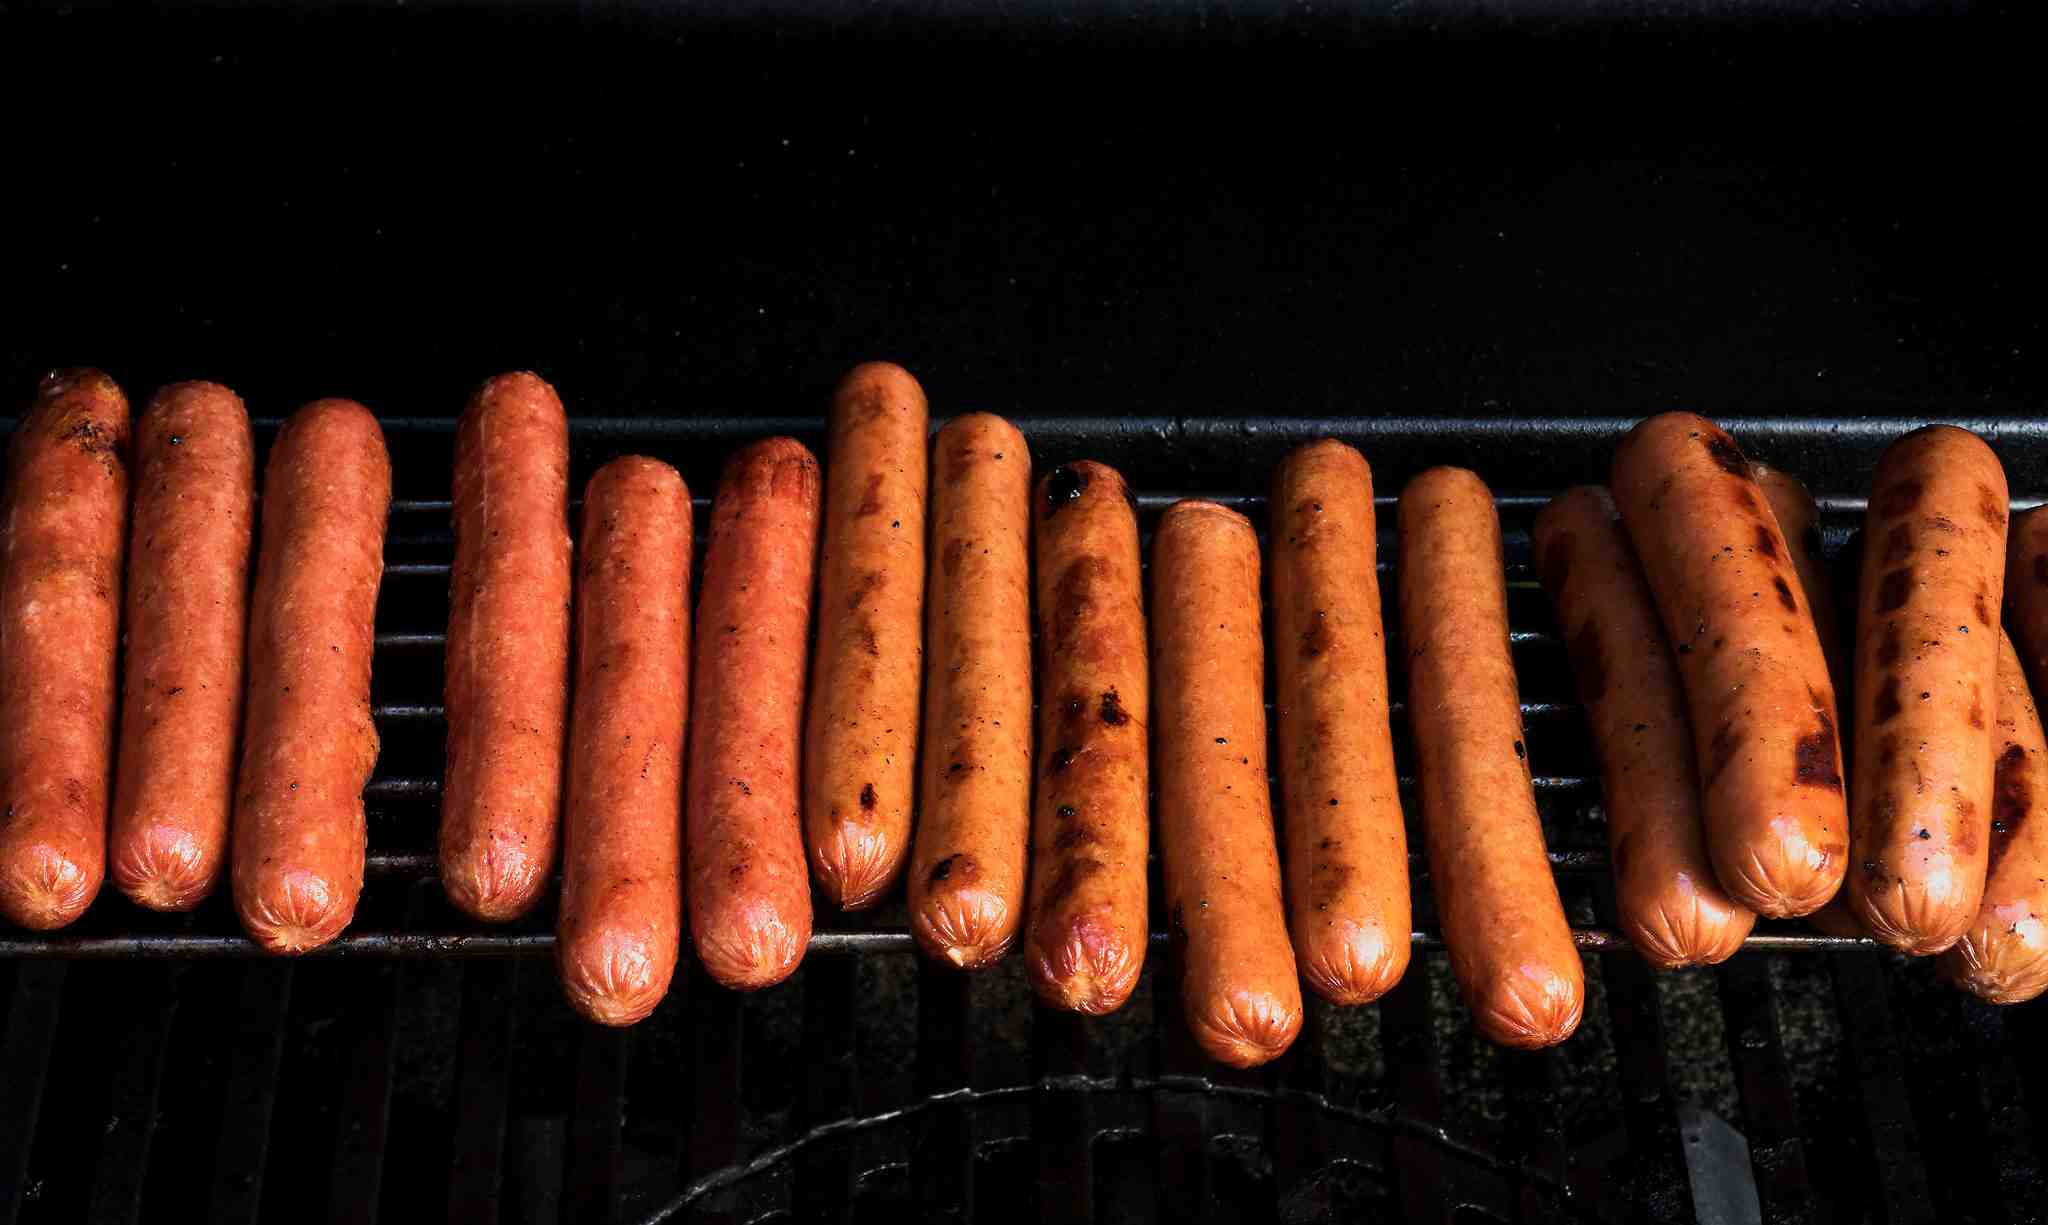 What gross things are in hot dogs?